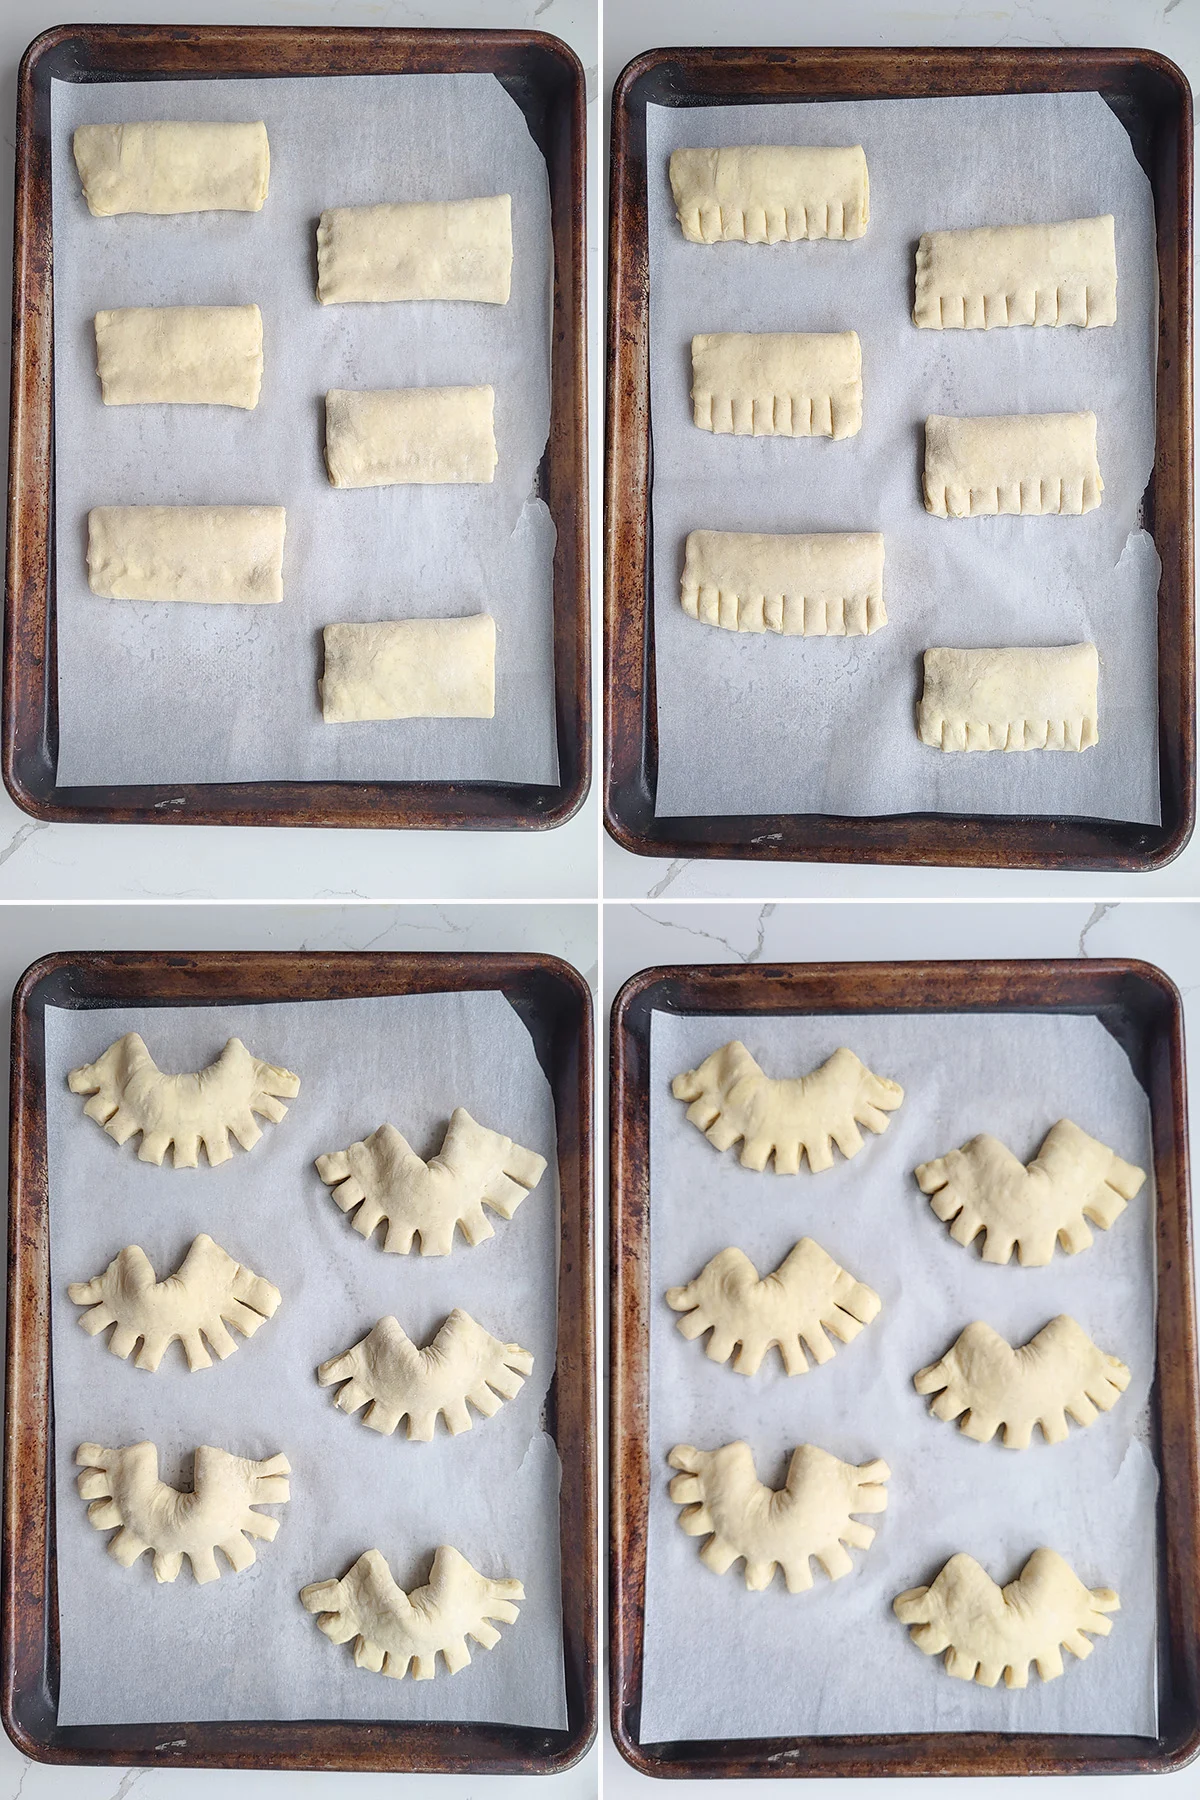 a tray of unbaked danish showing steps to shaping.